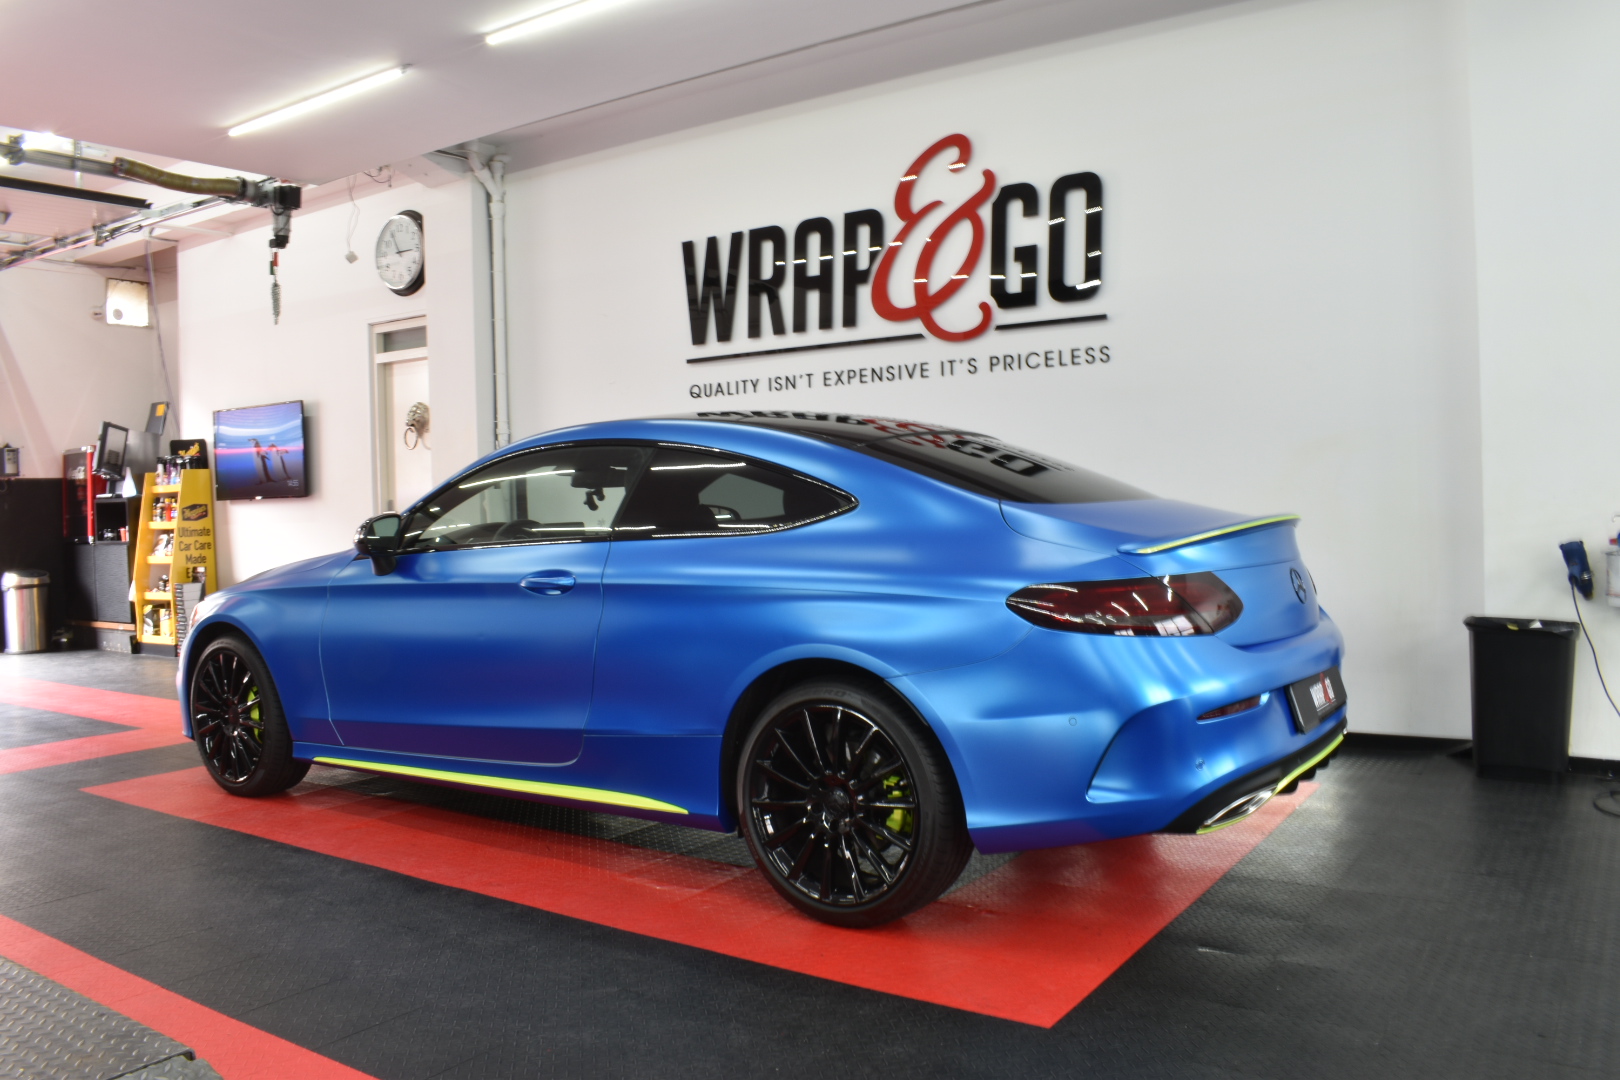 Mercedes C-Coupe, 3M Certified Car Wrapper, WrapAndGo